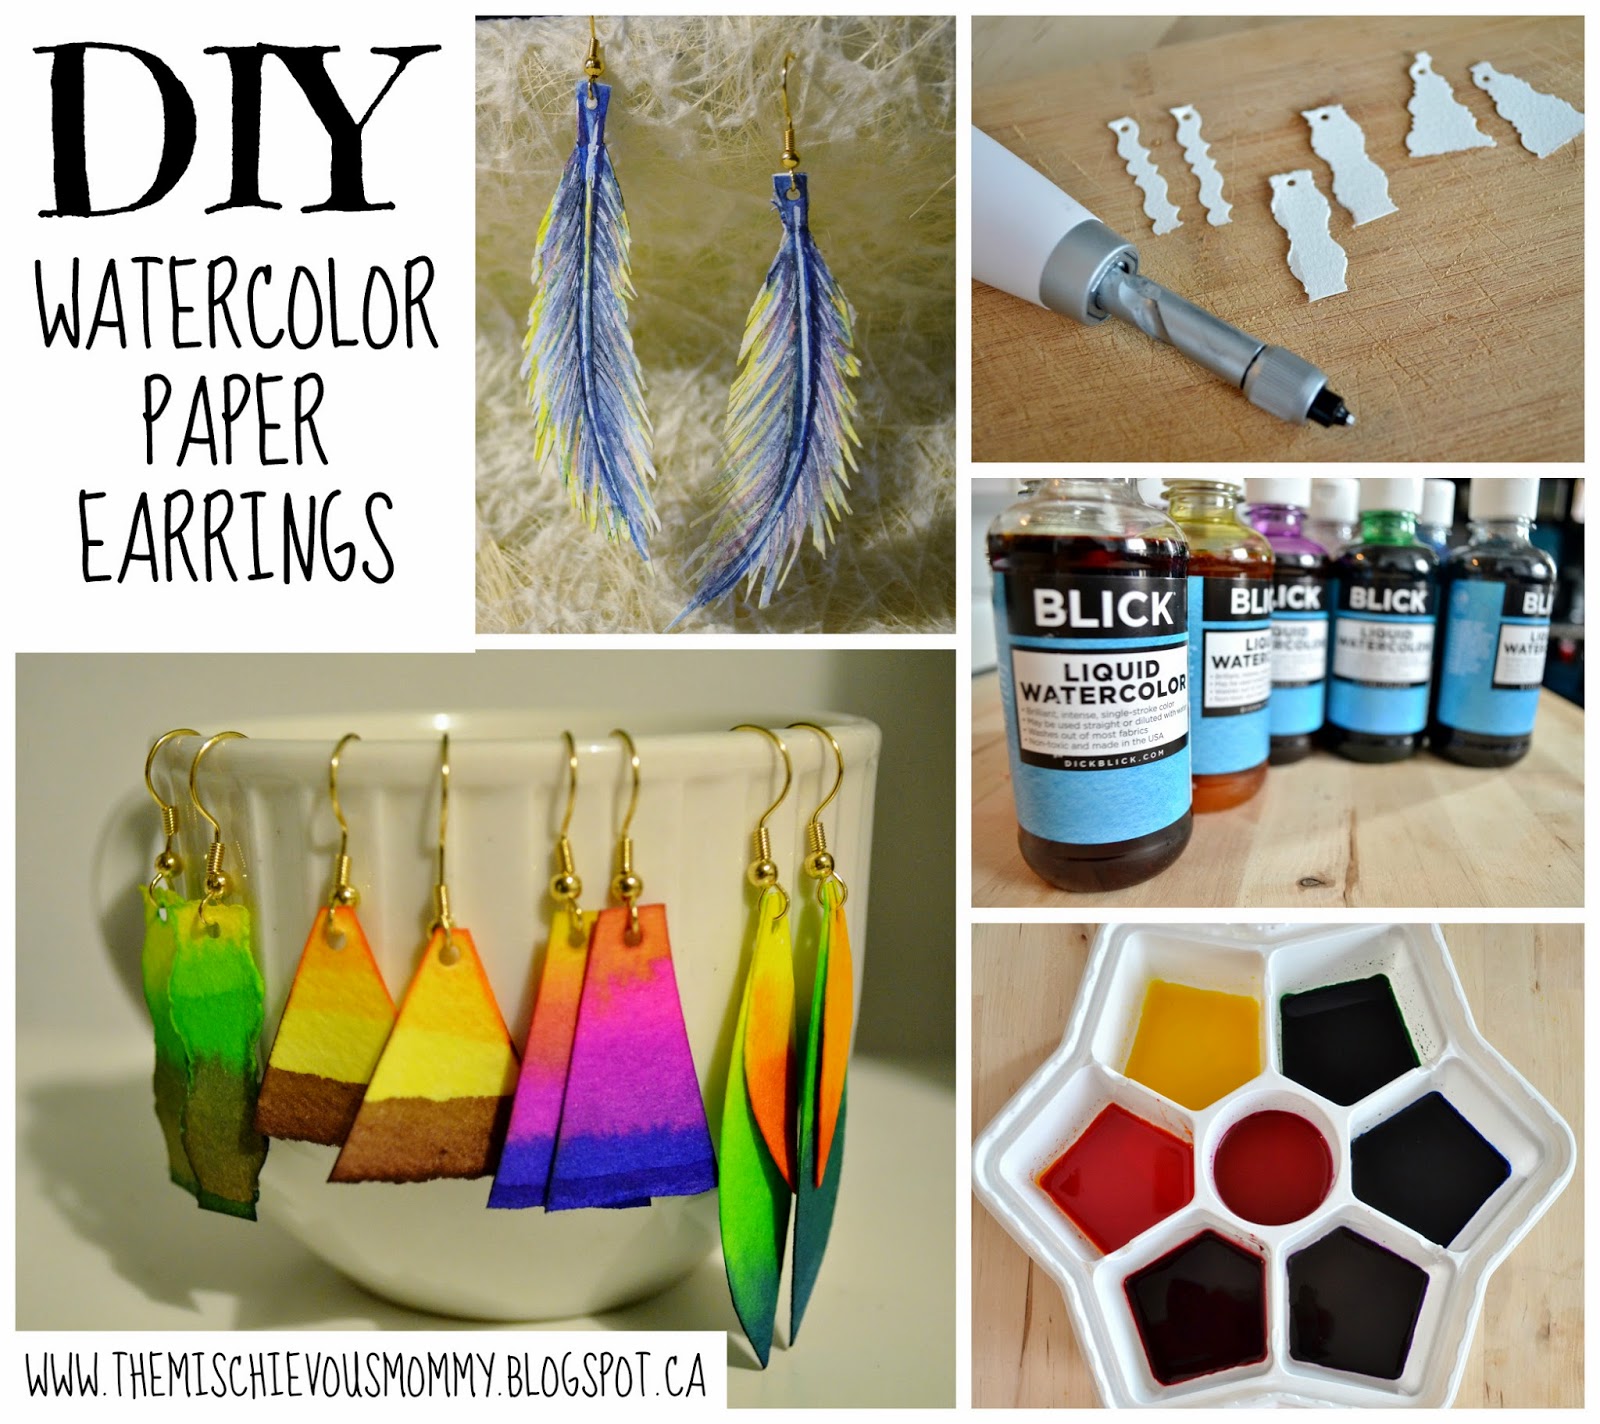 The Mischievous Mommy: DIY Watercolor Paper Earrings Tutorial